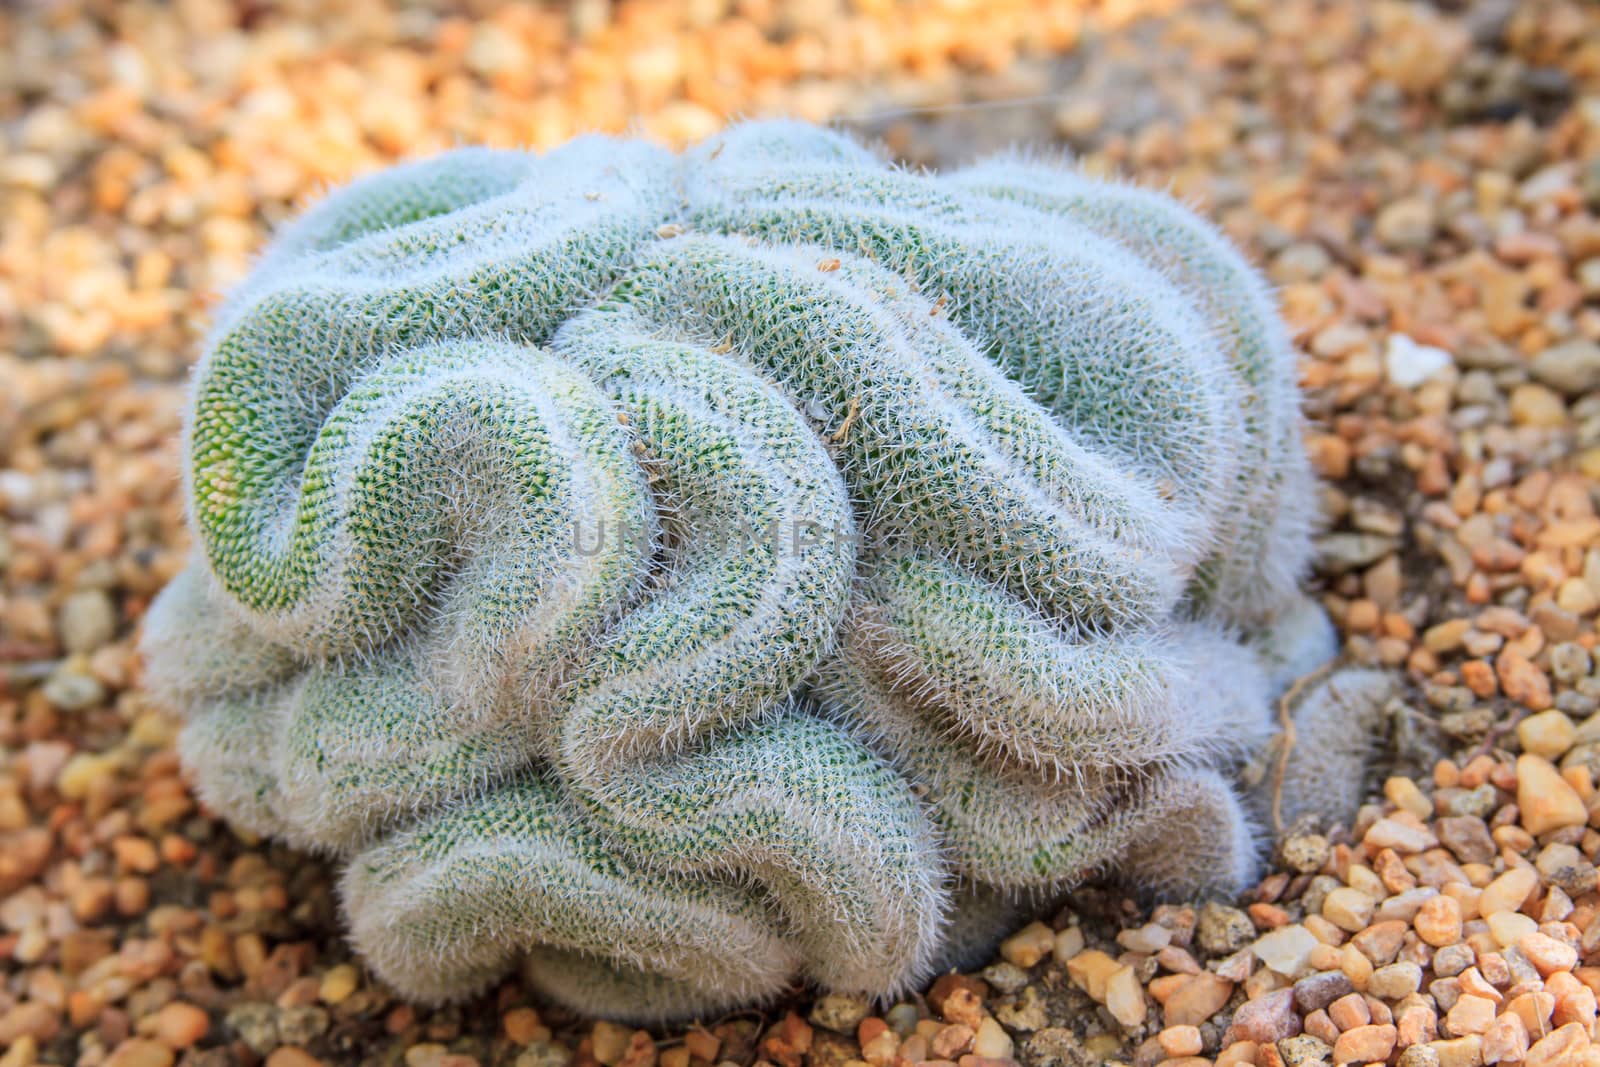 Cactus species coiled like a snake or brain